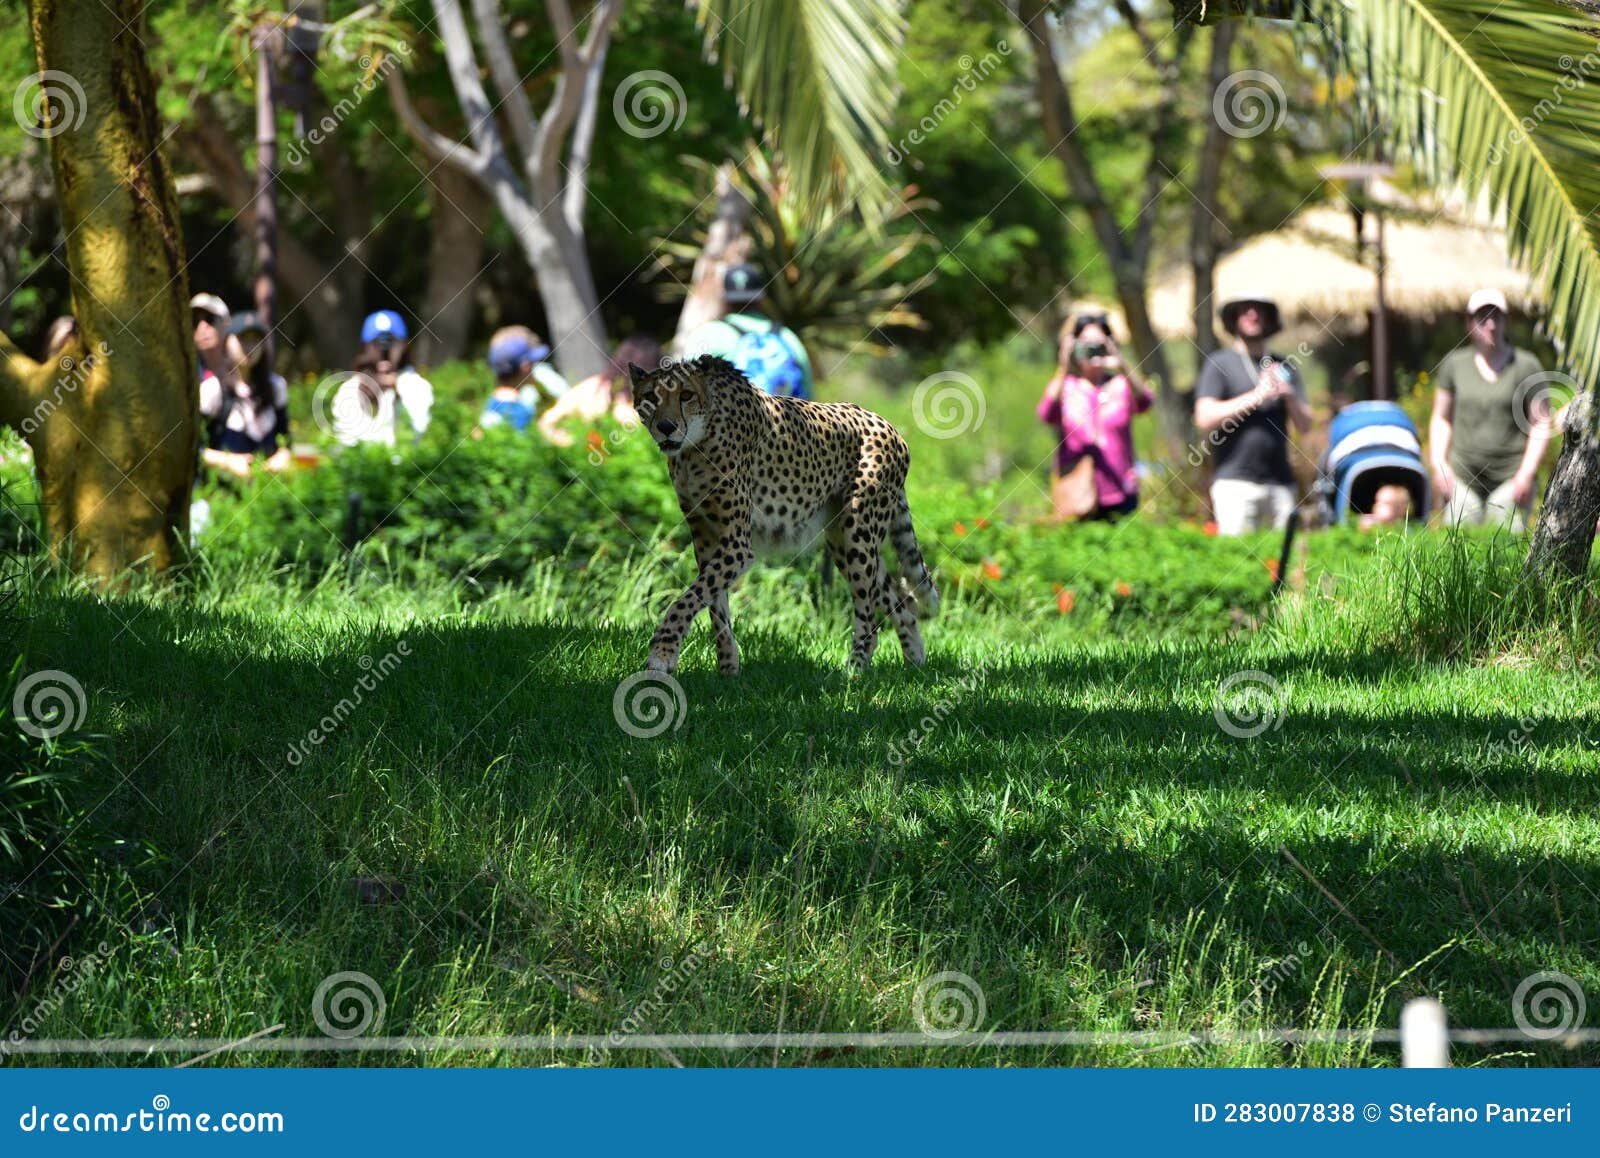 Cheetah in shade in a zoo editorial stock photo. Image of jungle ...